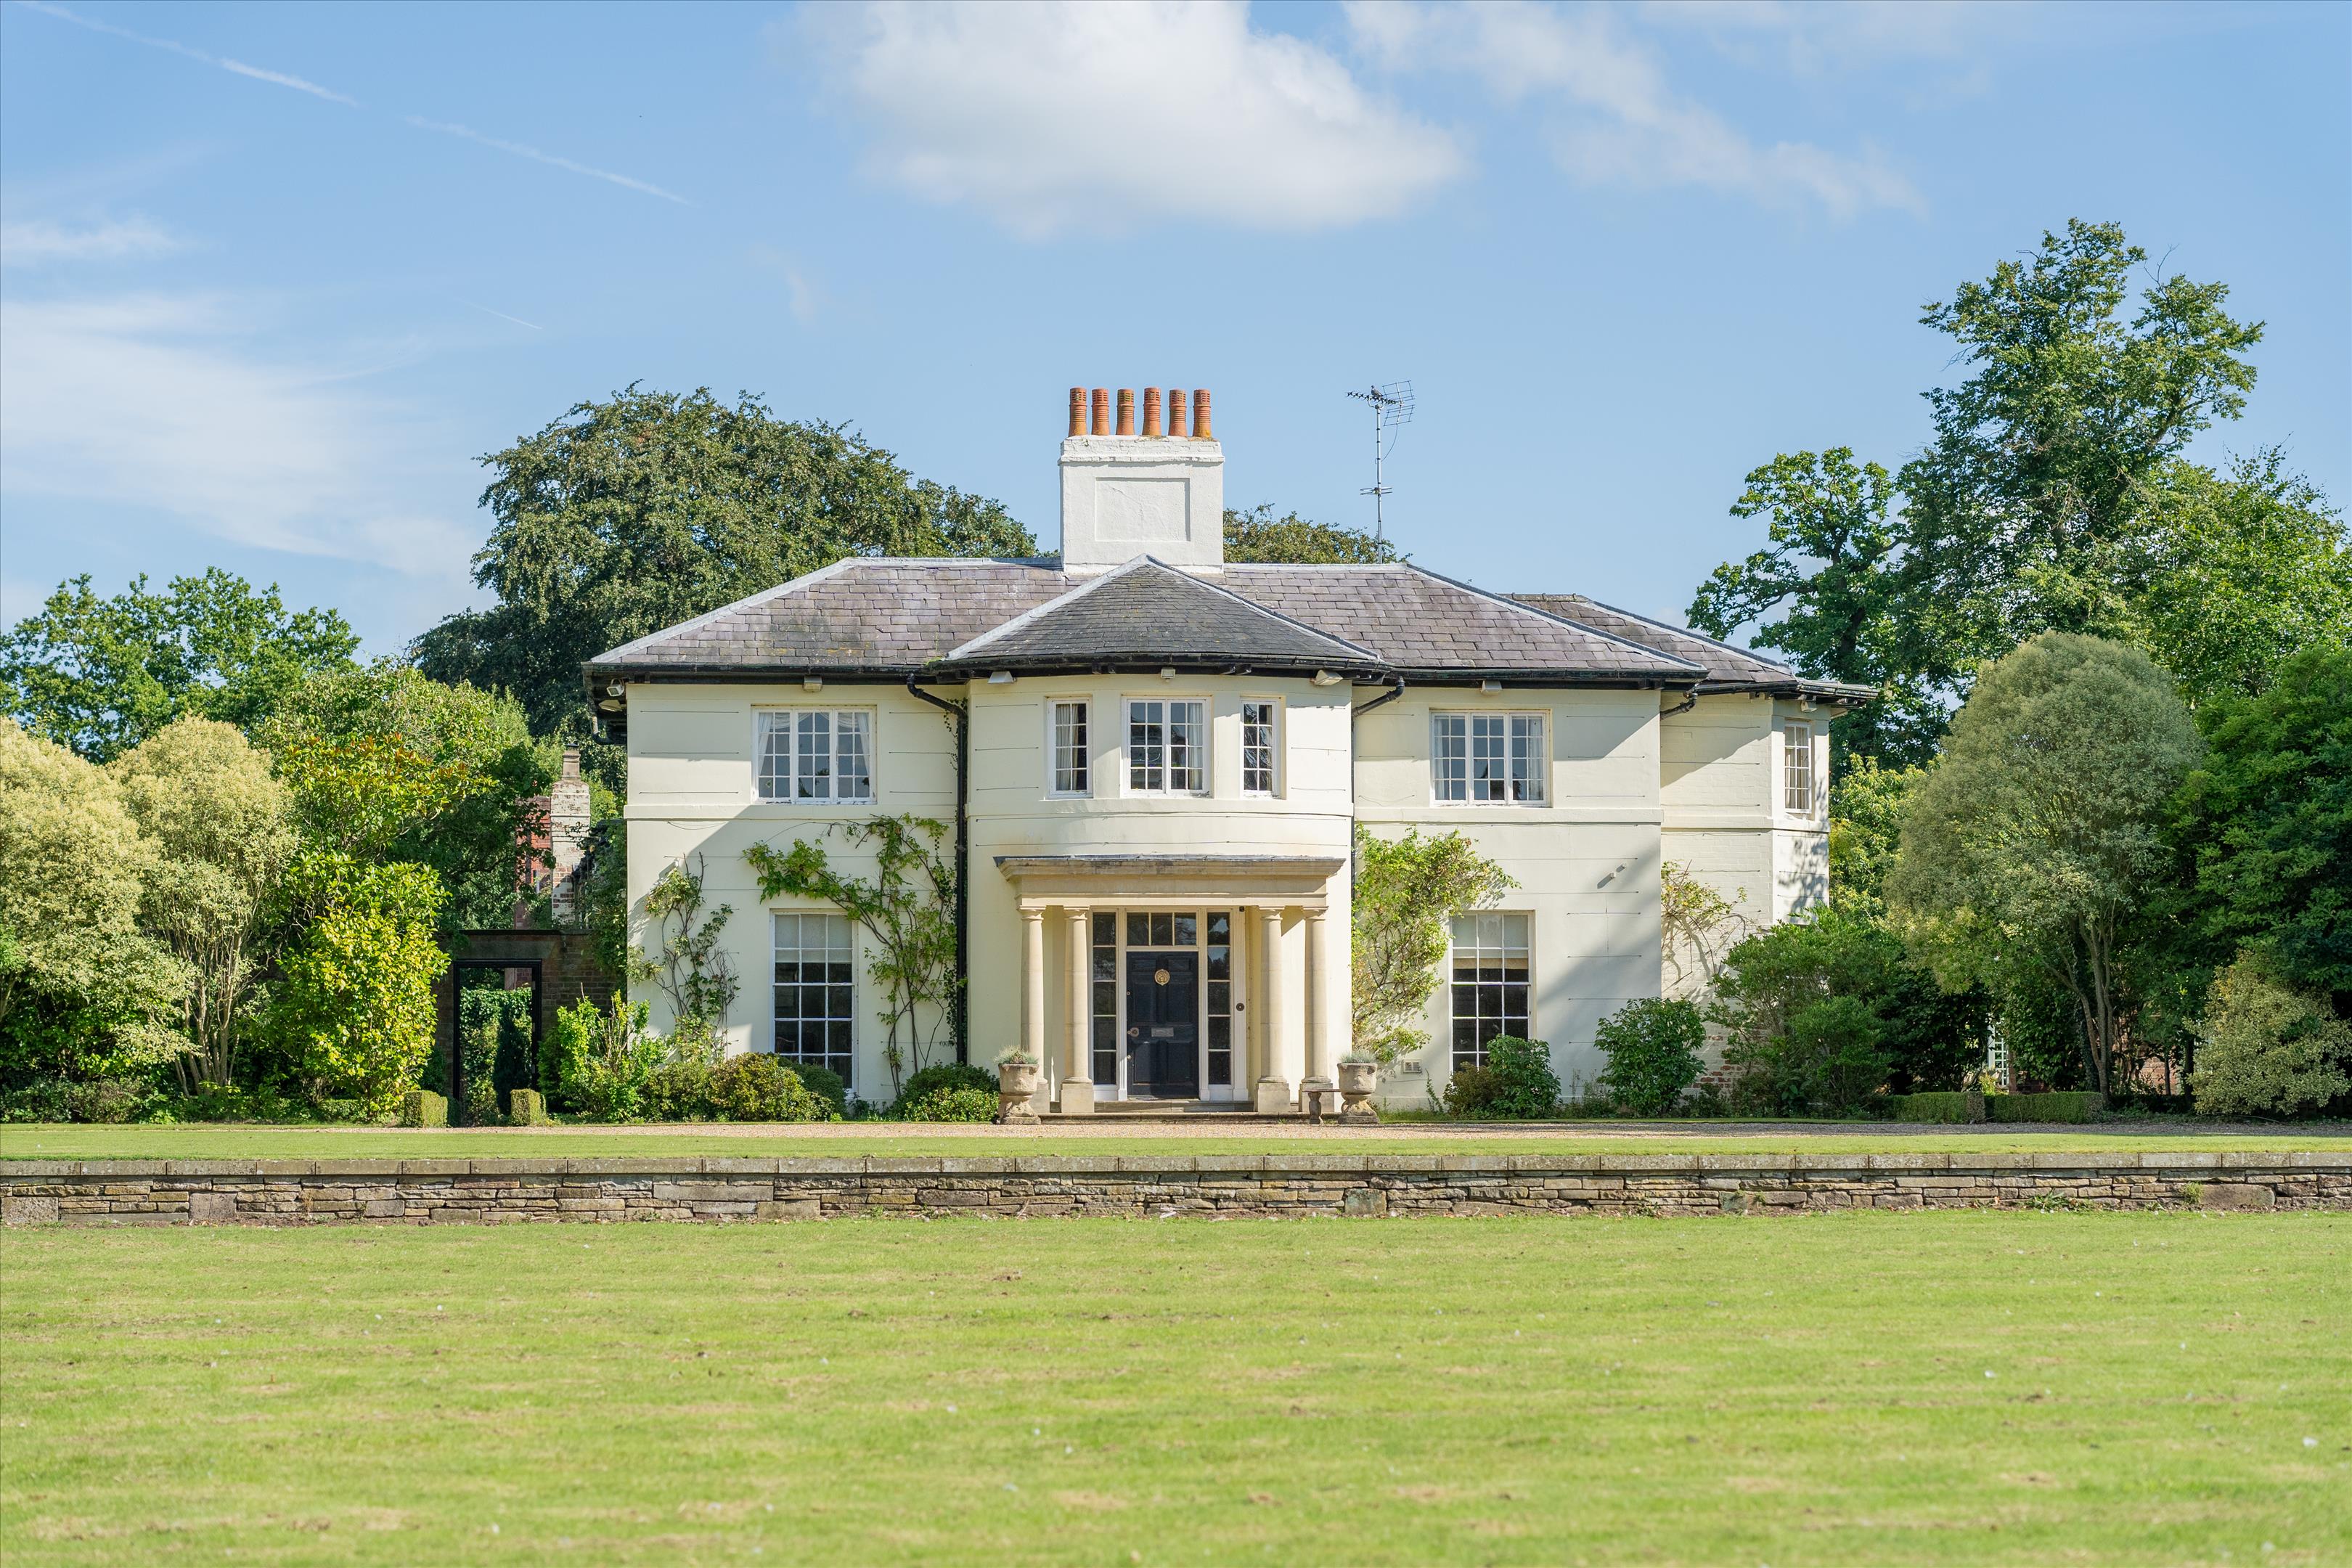 20 acres, Georgian country house near Nantwich., CW5, Cheshire